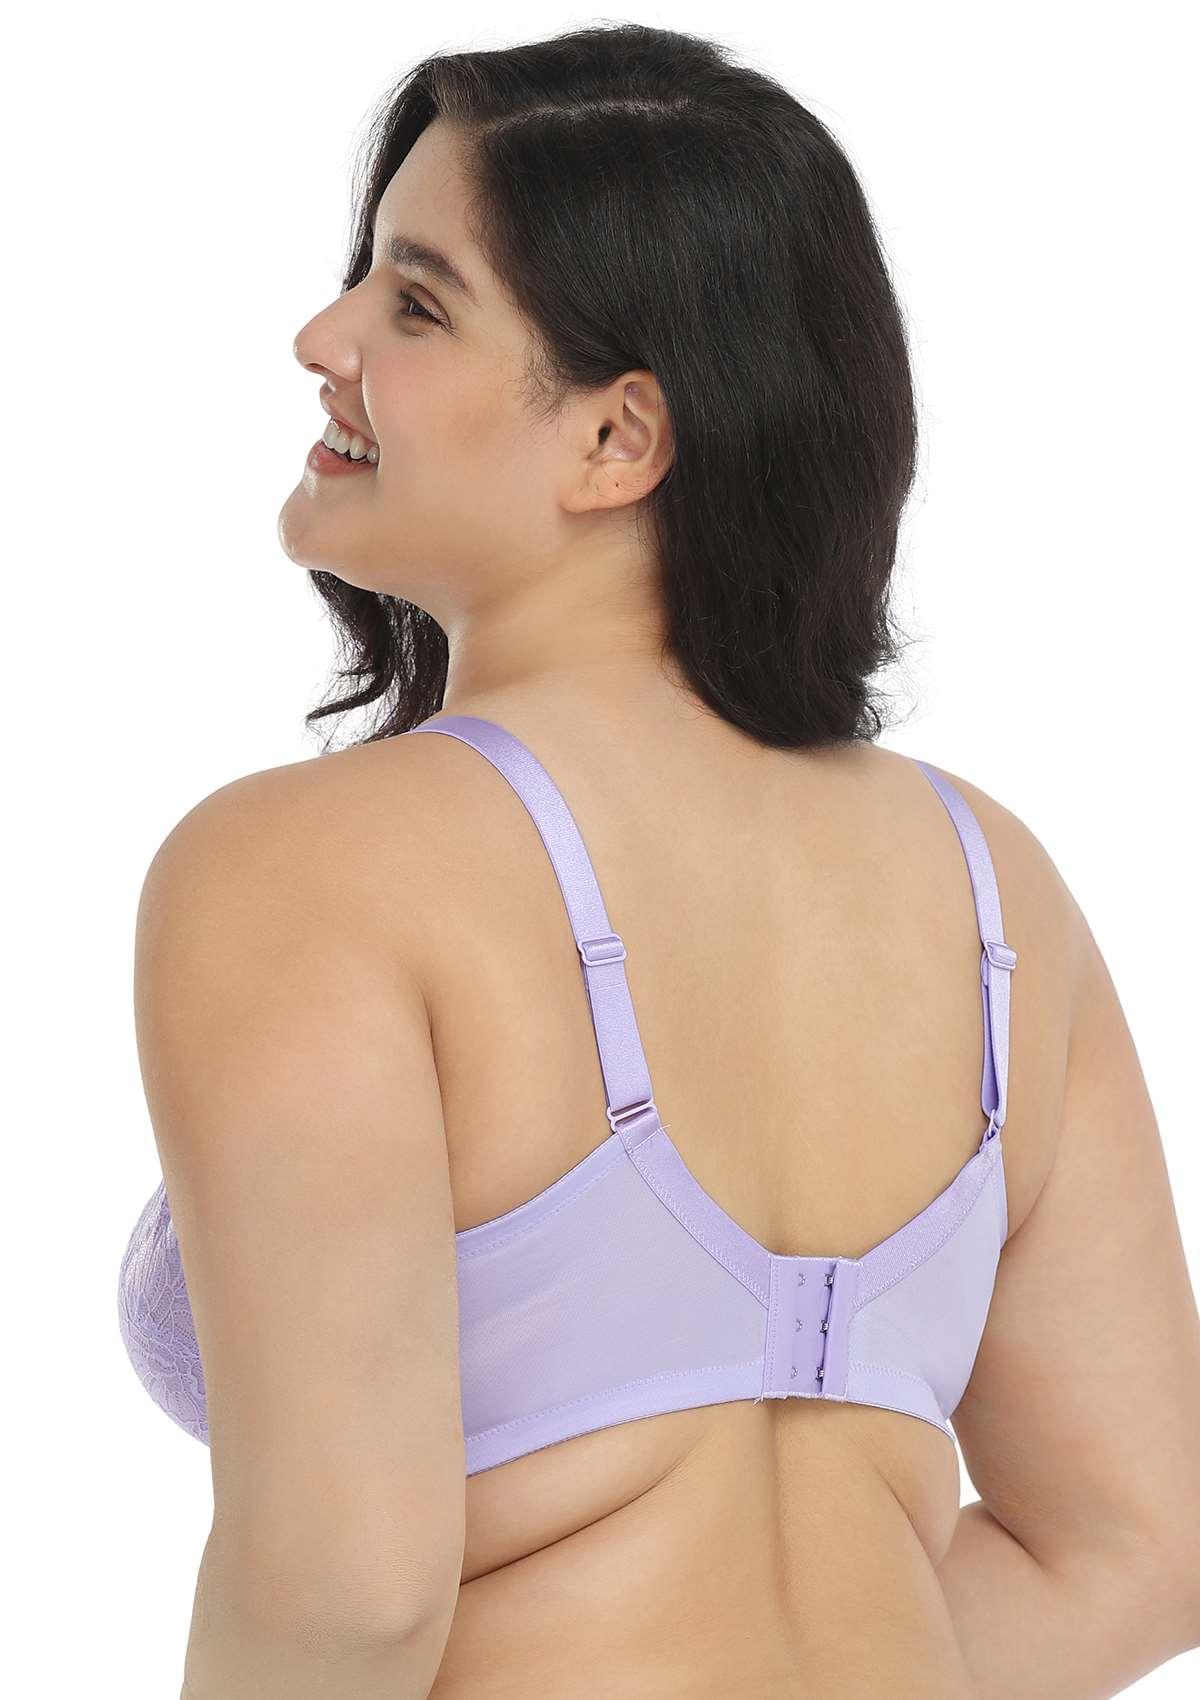 HSIA Blossom Transparent Lace Bra: Plus Size Wired Back Smoothing Bra - Light Purple / 46 / D